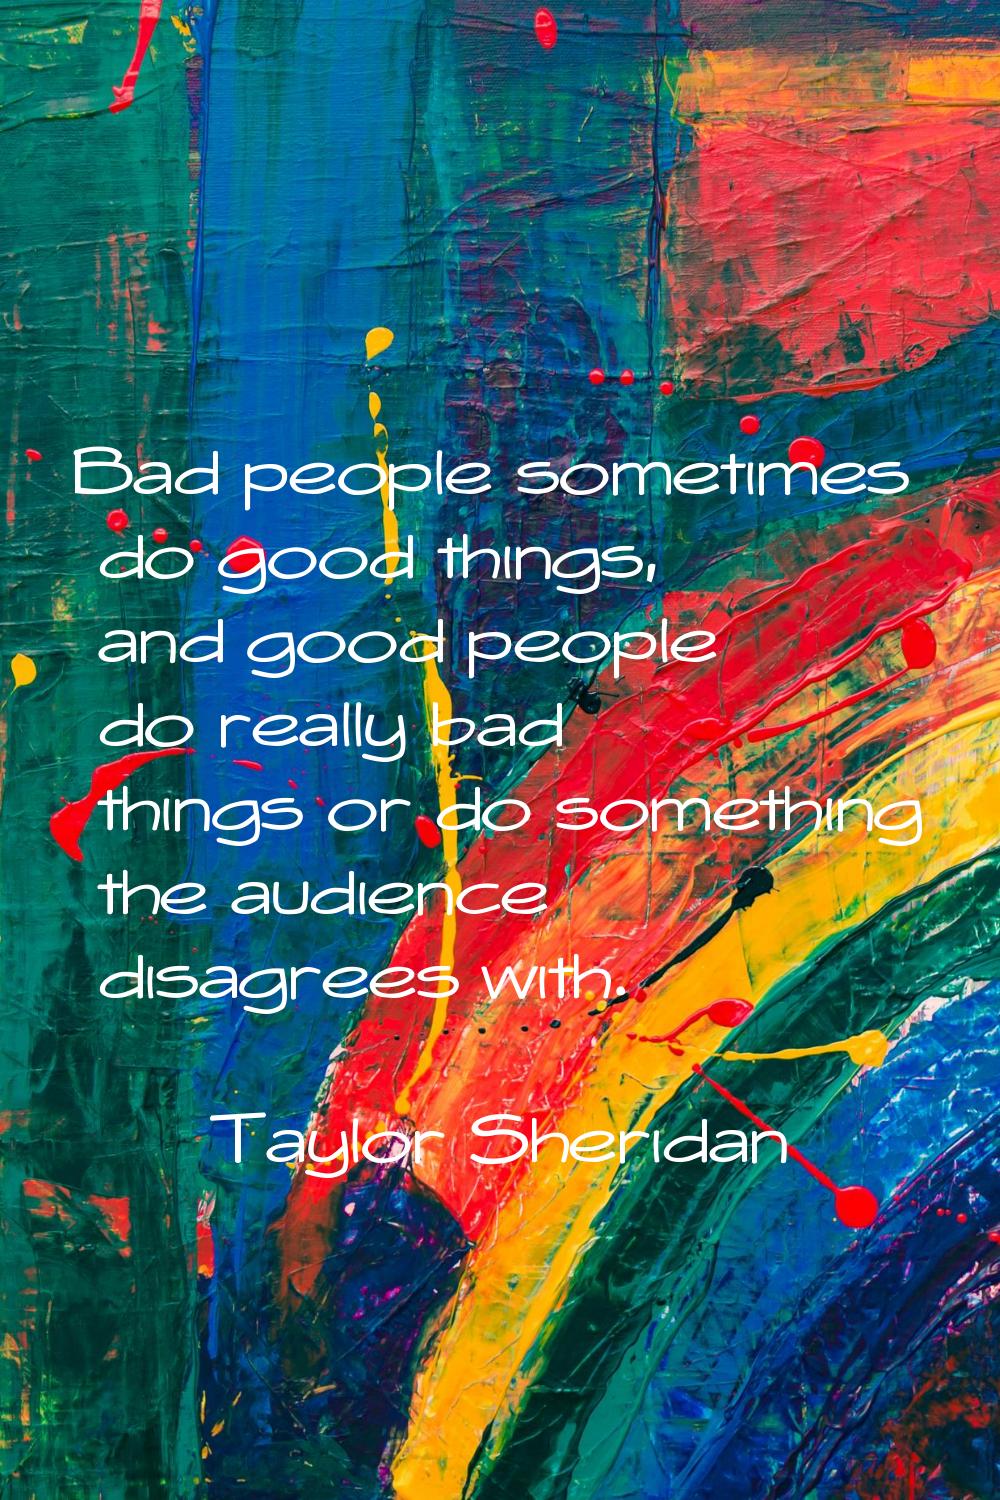 Bad people sometimes do good things, and good people do really bad things or do something the audie